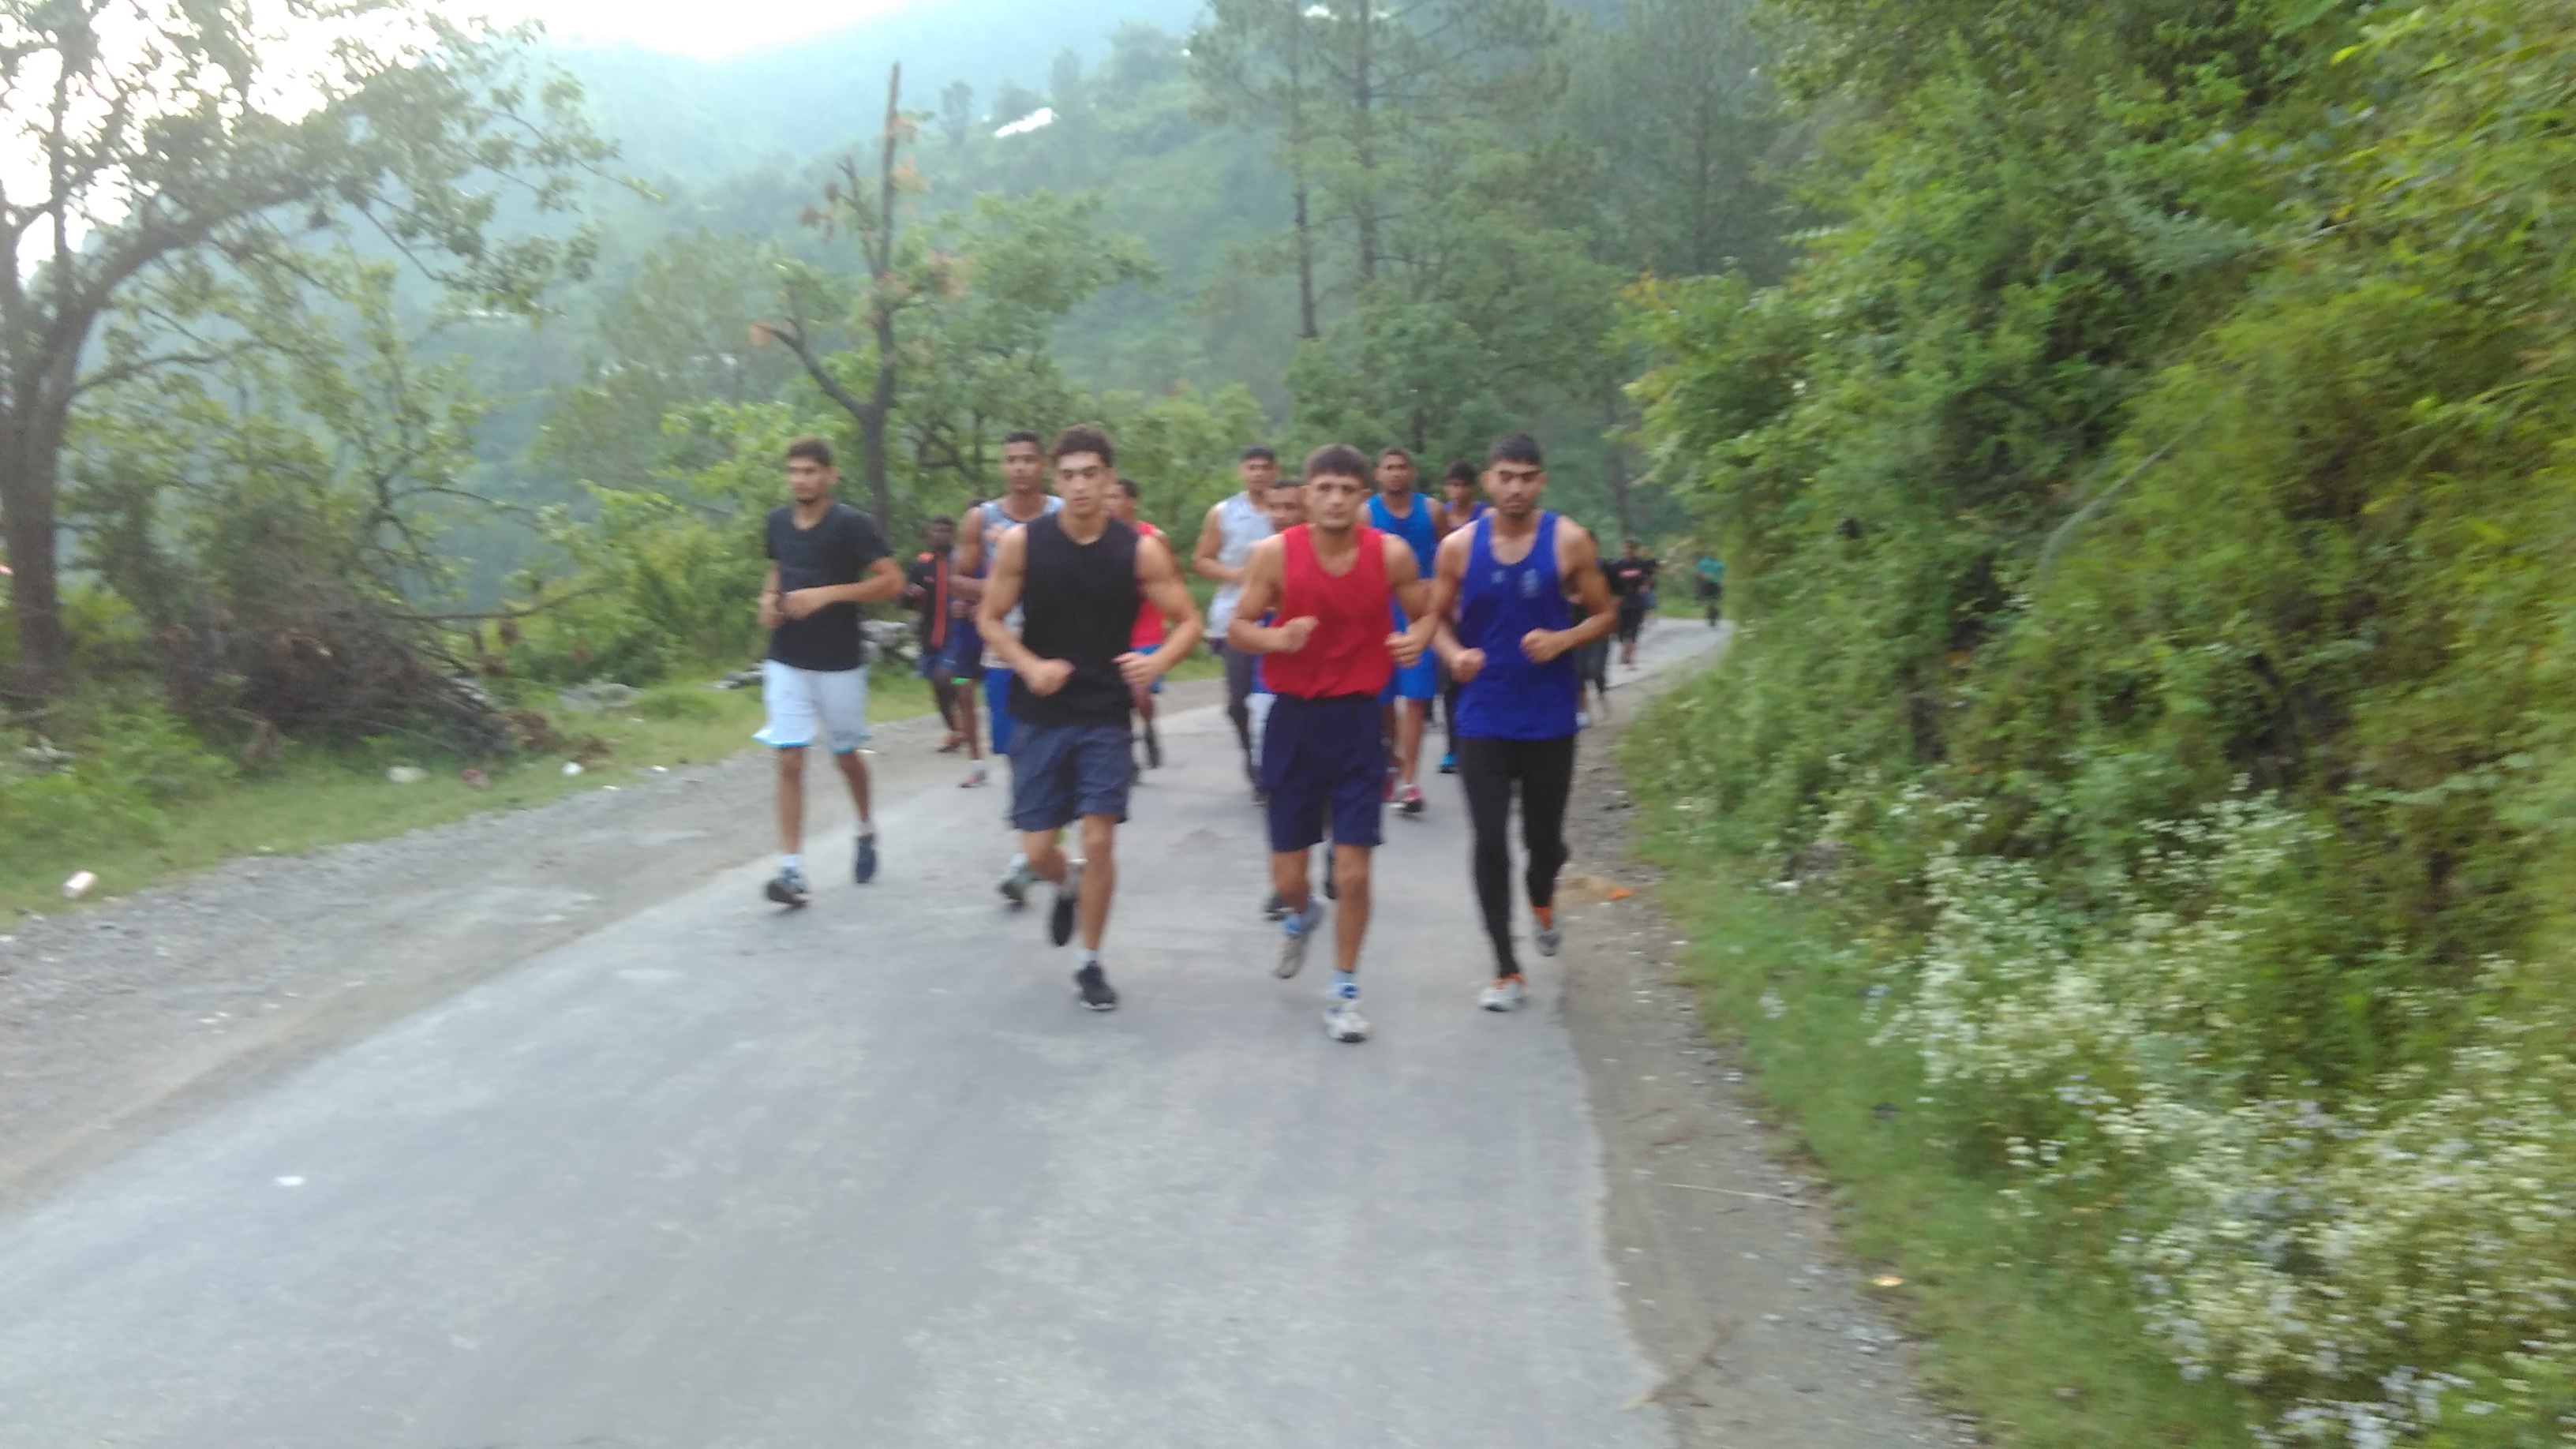 Sports Authority of India National Boxing Academy Rohtak's Trainees During Their Cross Country Run to Chail-3